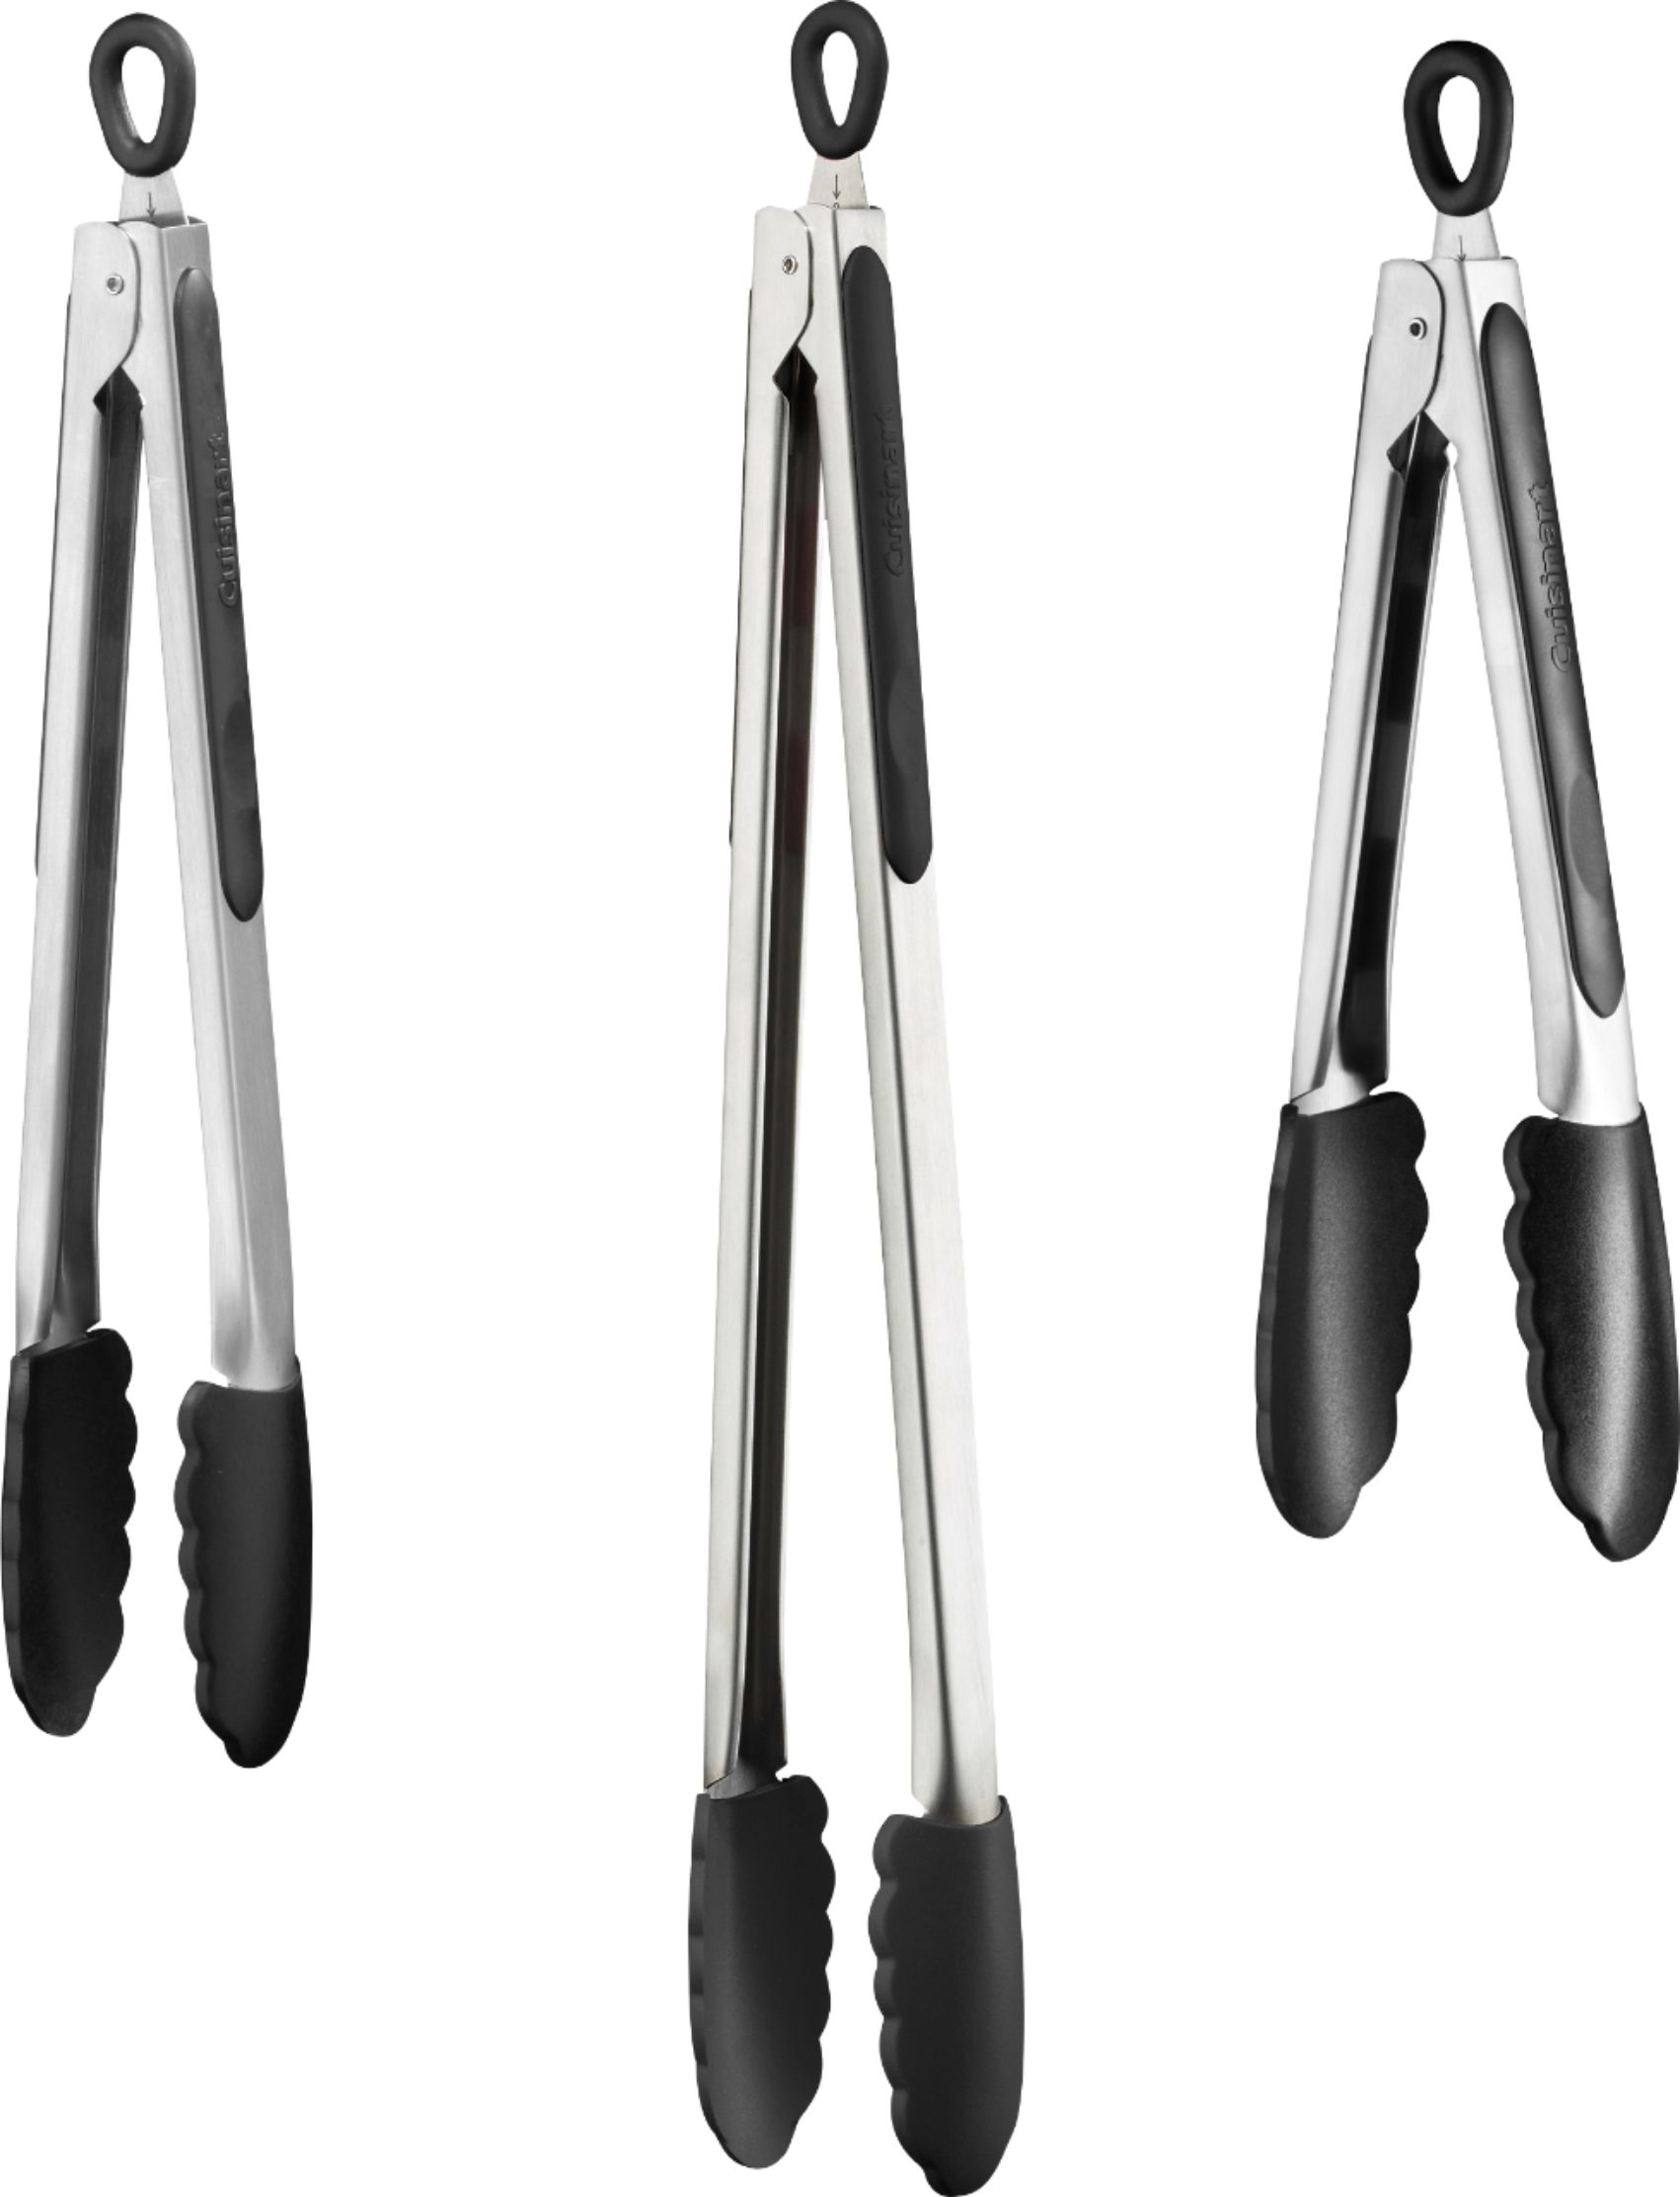 Angle View: Cuisinart - Set of 3 Tongs - Stainless Steel/Black